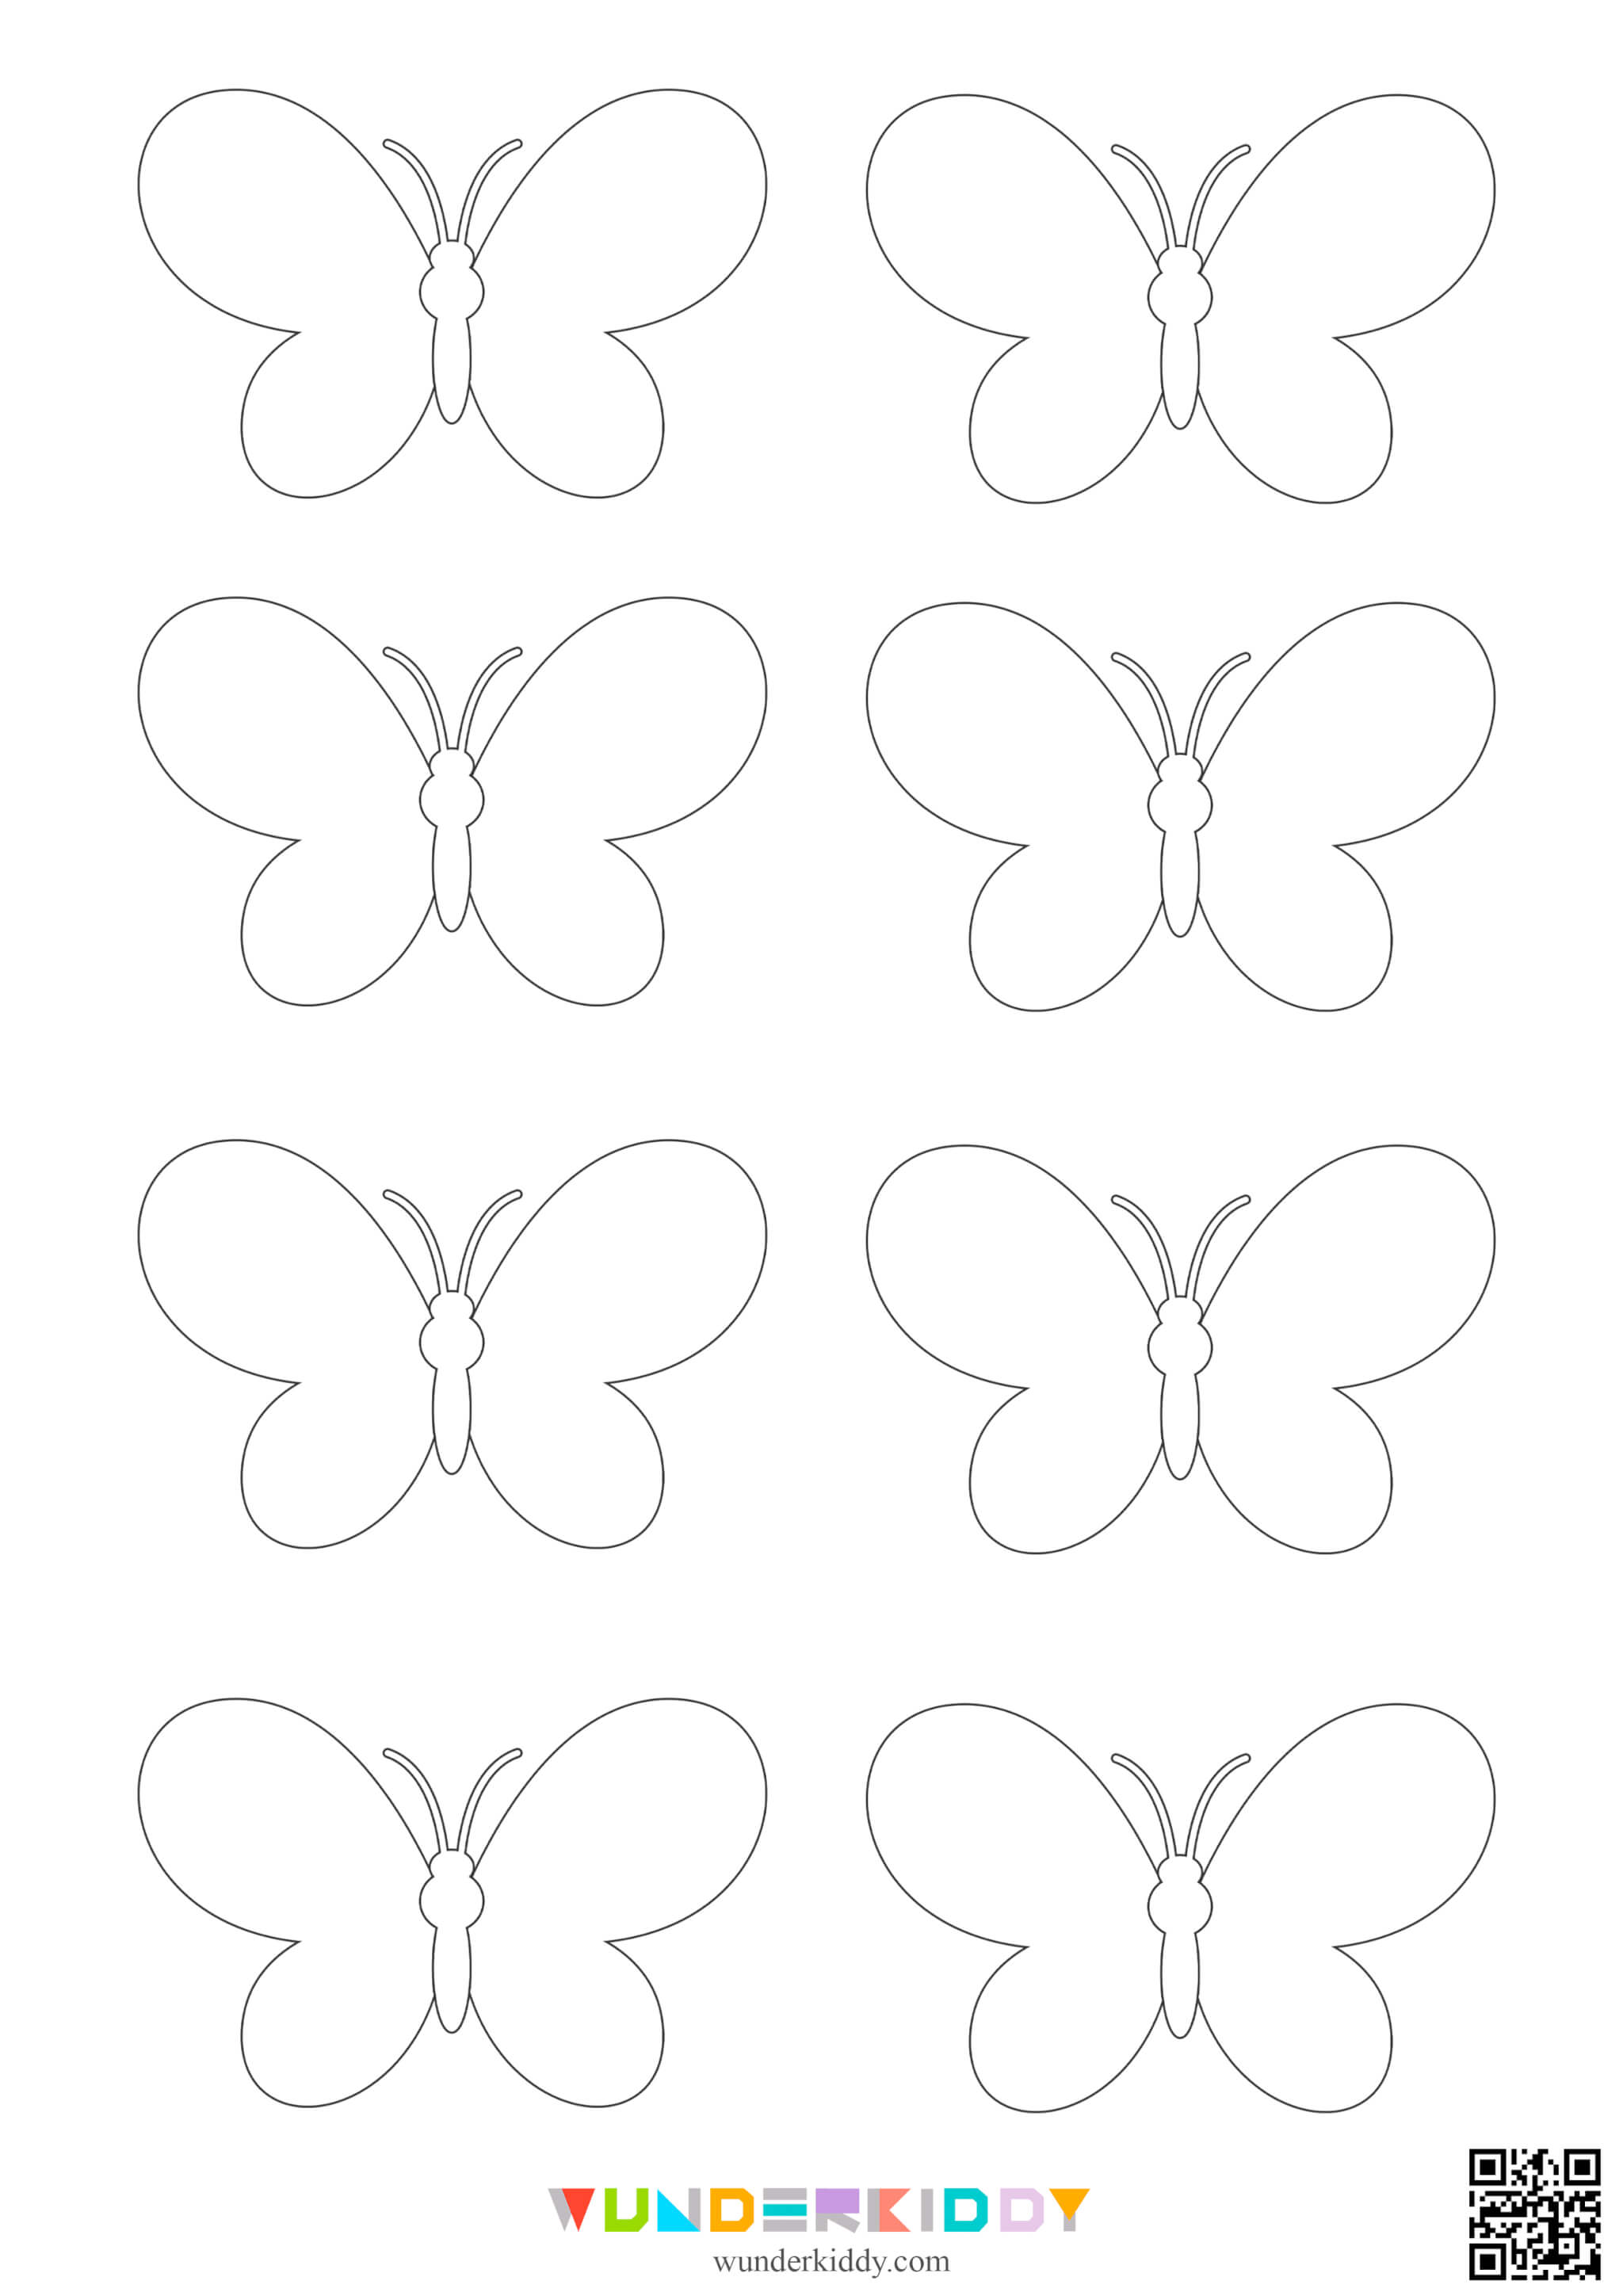 Free Printable Butterfly Templates - Image 10